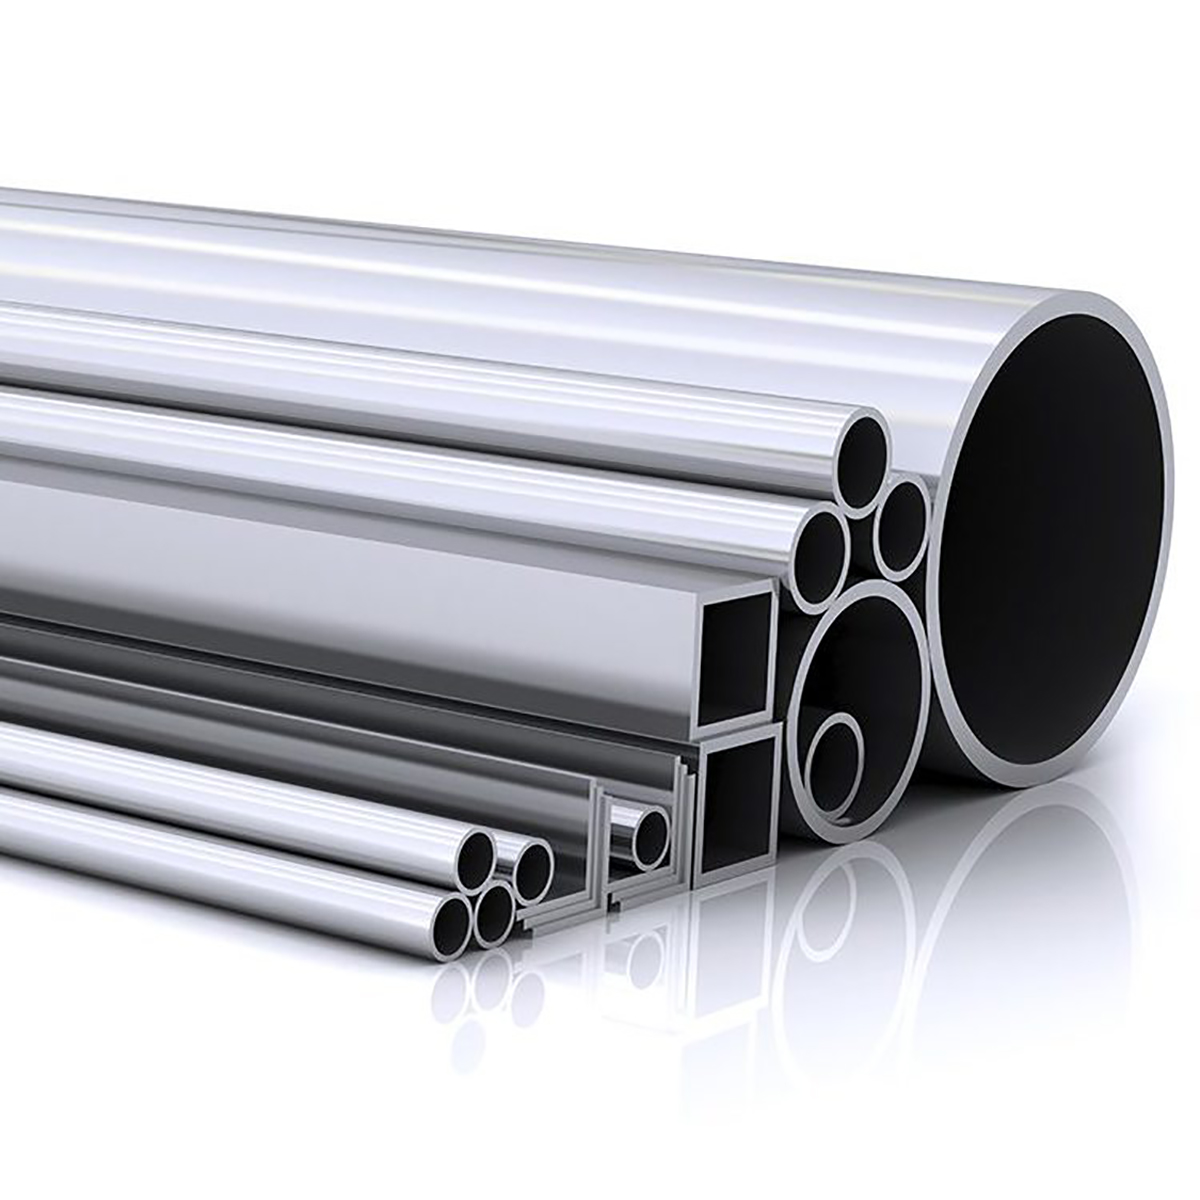 What is the difference between 304 and 304L stainless steel pipe?